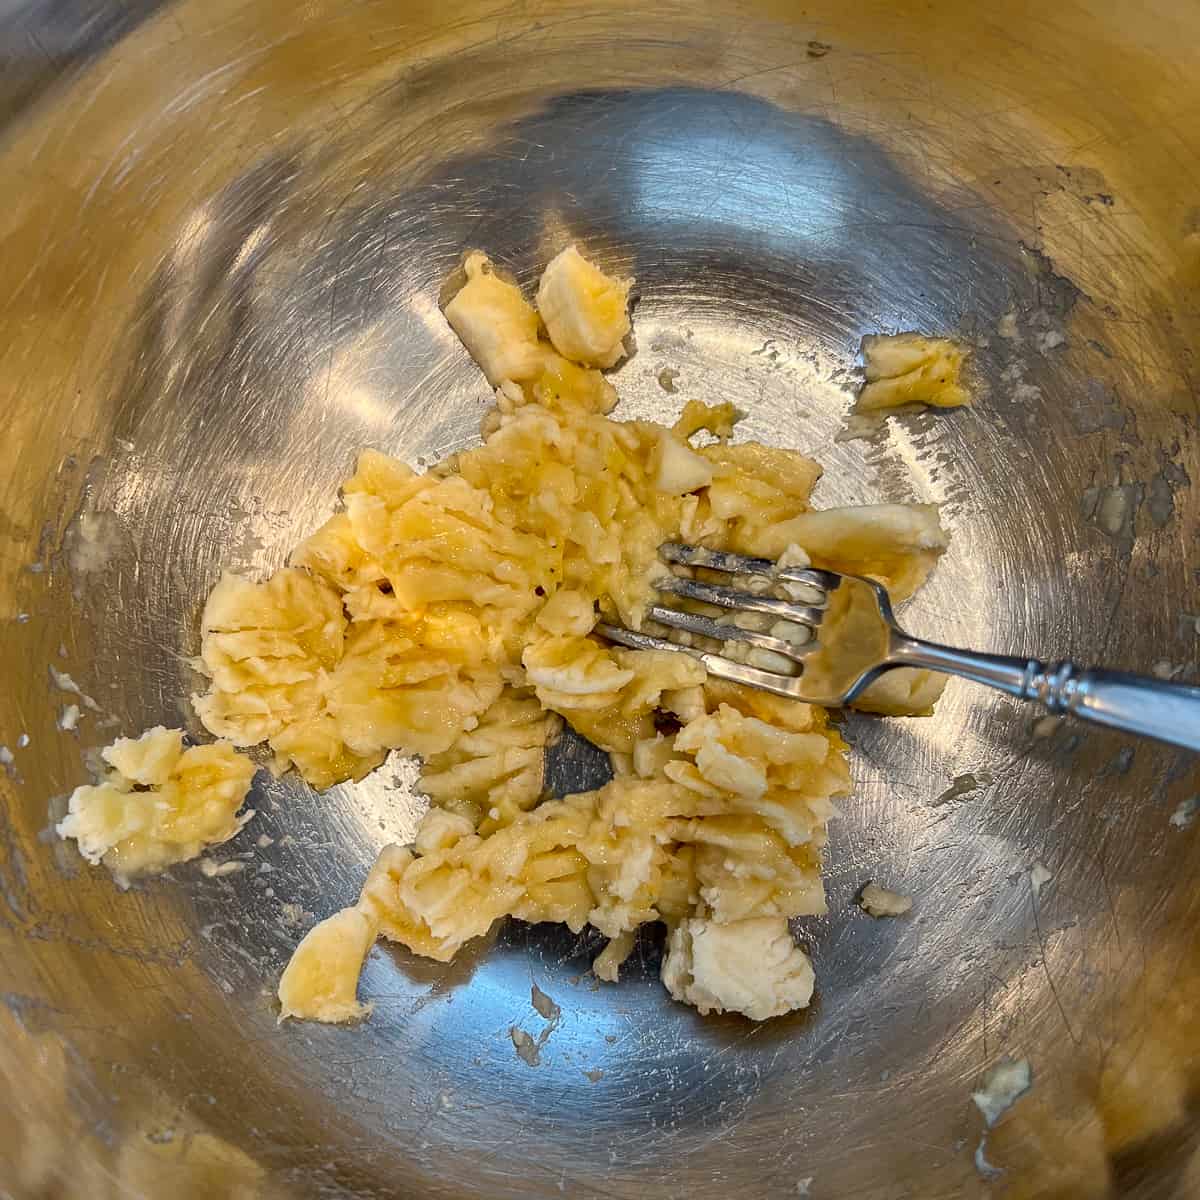 top view of a fork smashing a banana in a stainless mixing bowl